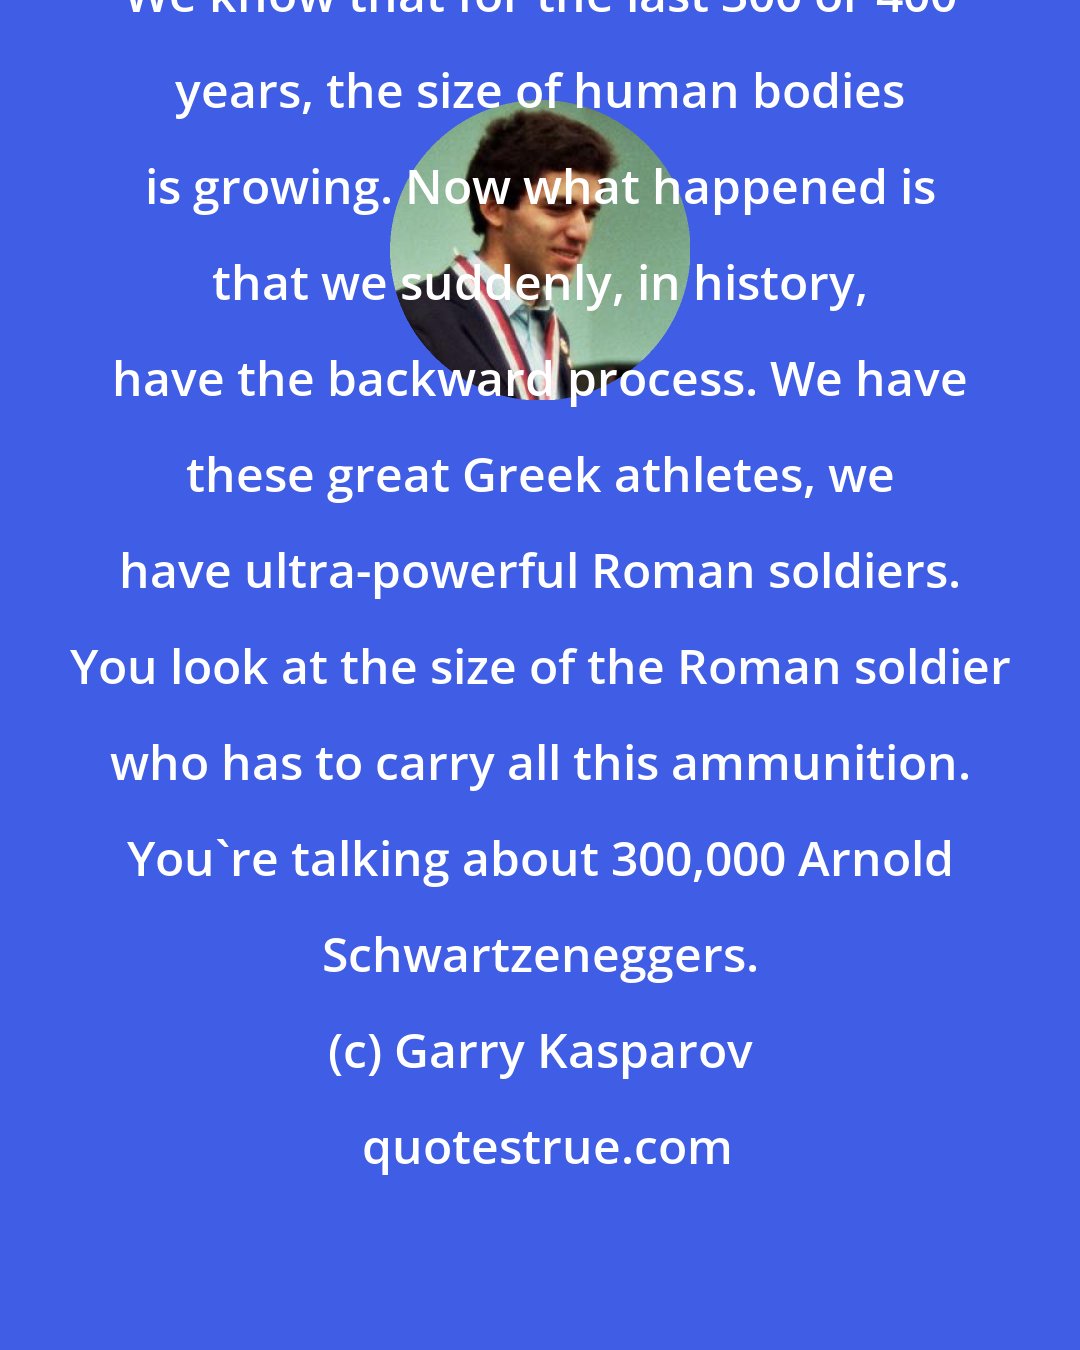 Garry Kasparov: We know that for the last 300 or 400 years, the size of human bodies is growing. Now what happened is that we suddenly, in history, have the backward process. We have these great Greek athletes, we have ultra-powerful Roman soldiers. You look at the size of the Roman soldier who has to carry all this ammunition. You're talking about 300,000 Arnold Schwartzeneggers.